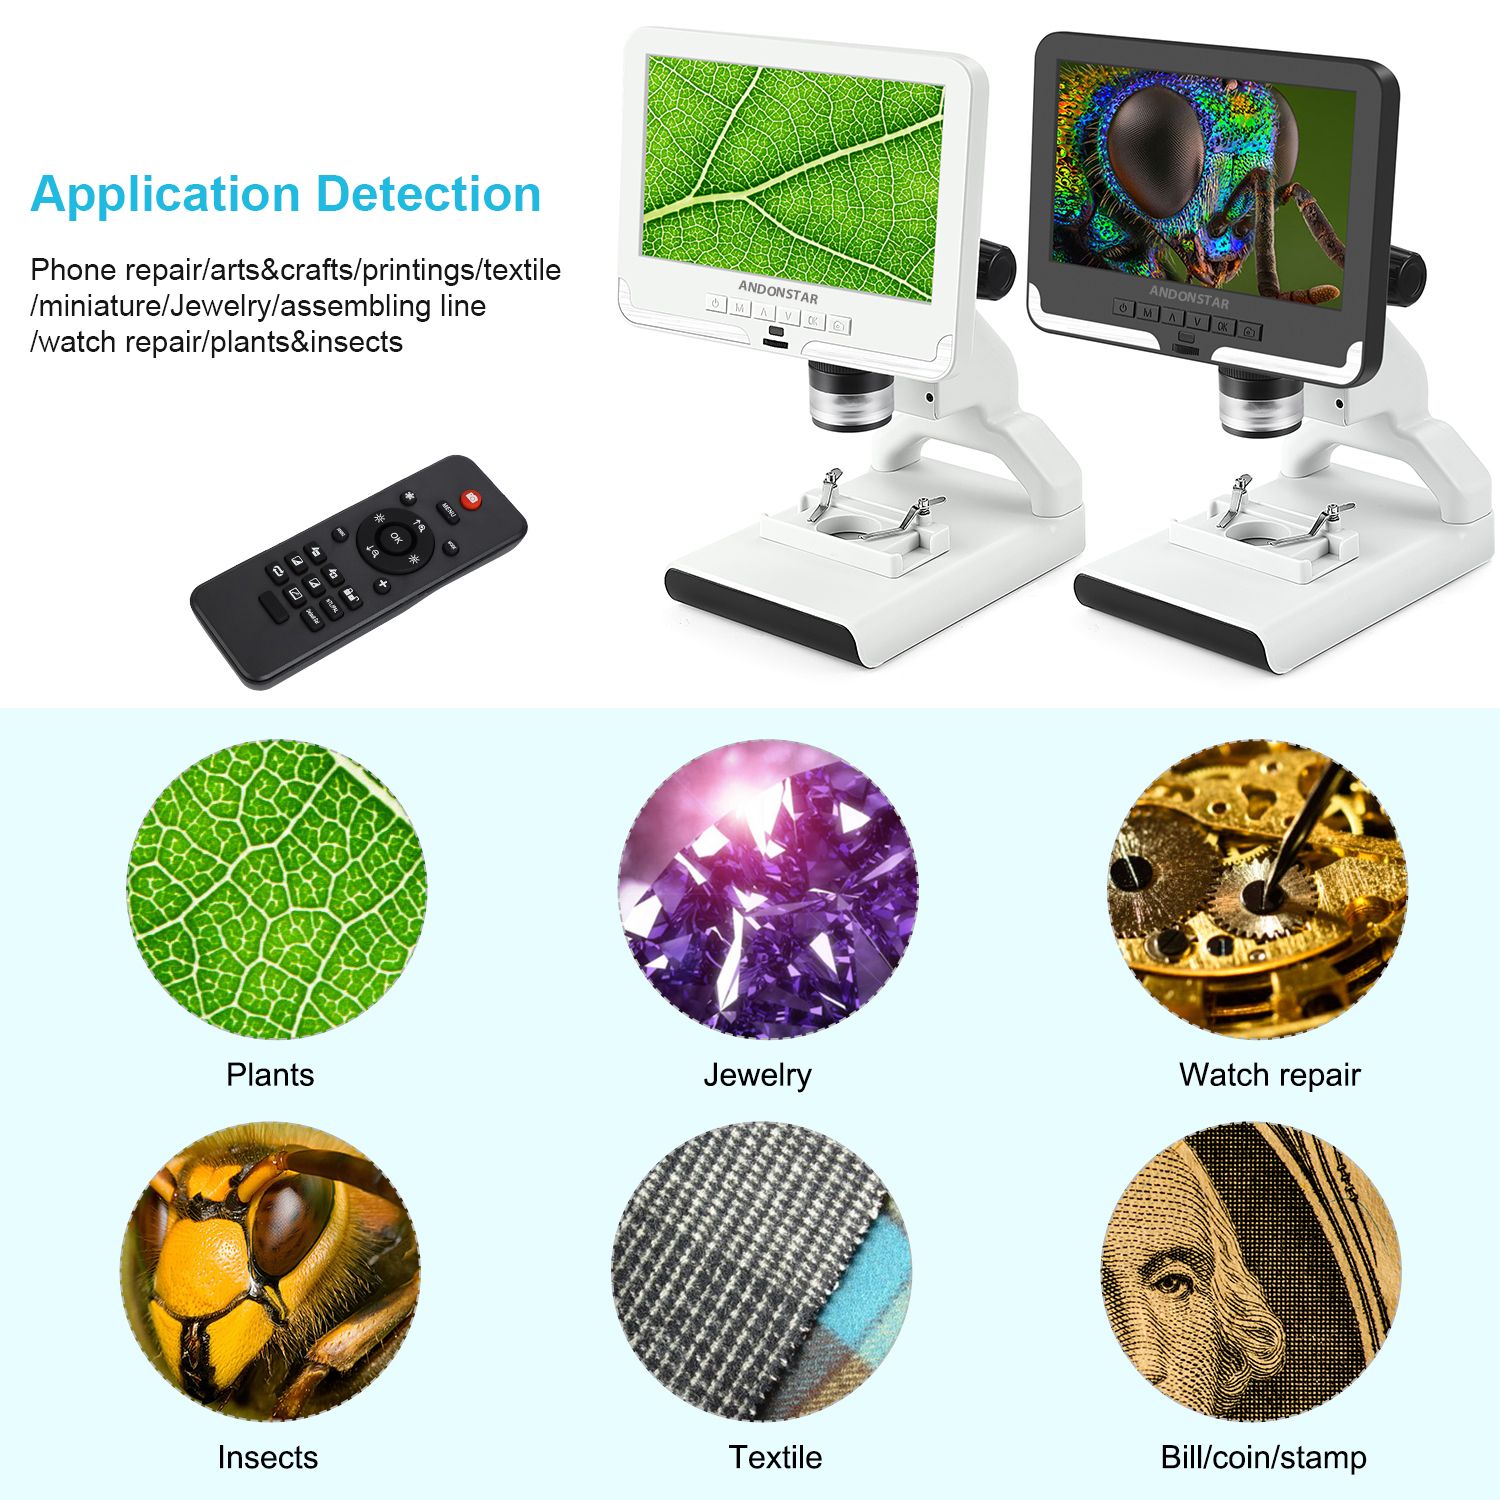 Anondstar-2MP-Digital-Microscope-AD108-7-Inch-LCD-Screen-Microscopes-with-Plastic-Stand-for-School-S-1646817